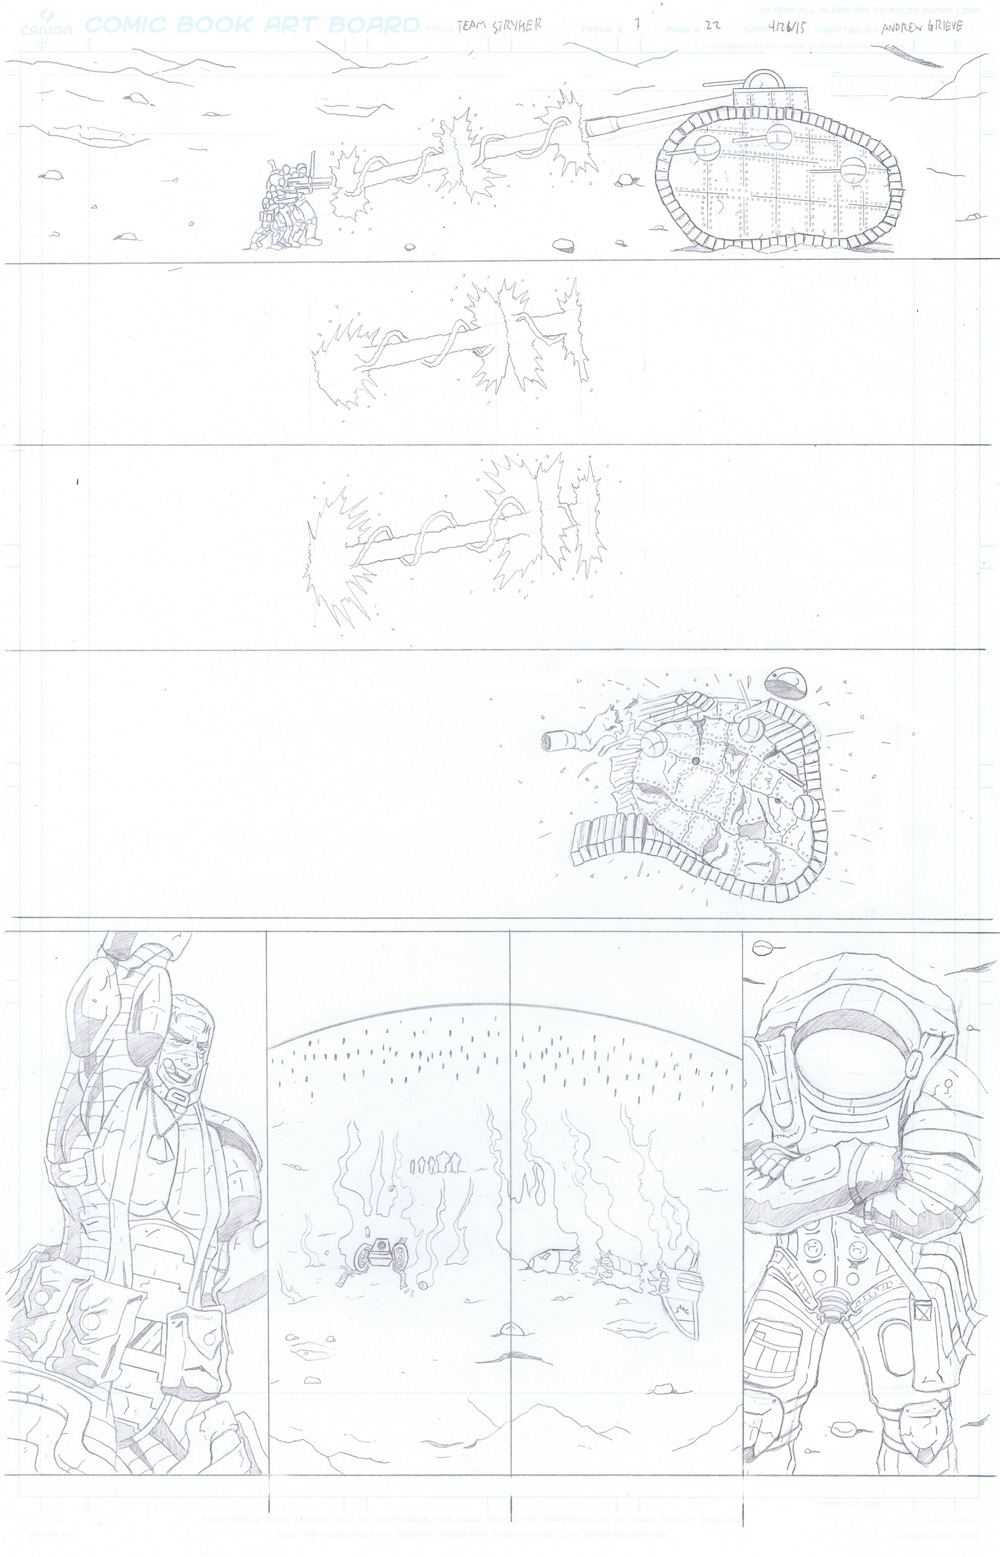 MISSION 007: PAGE 22 PENCIL